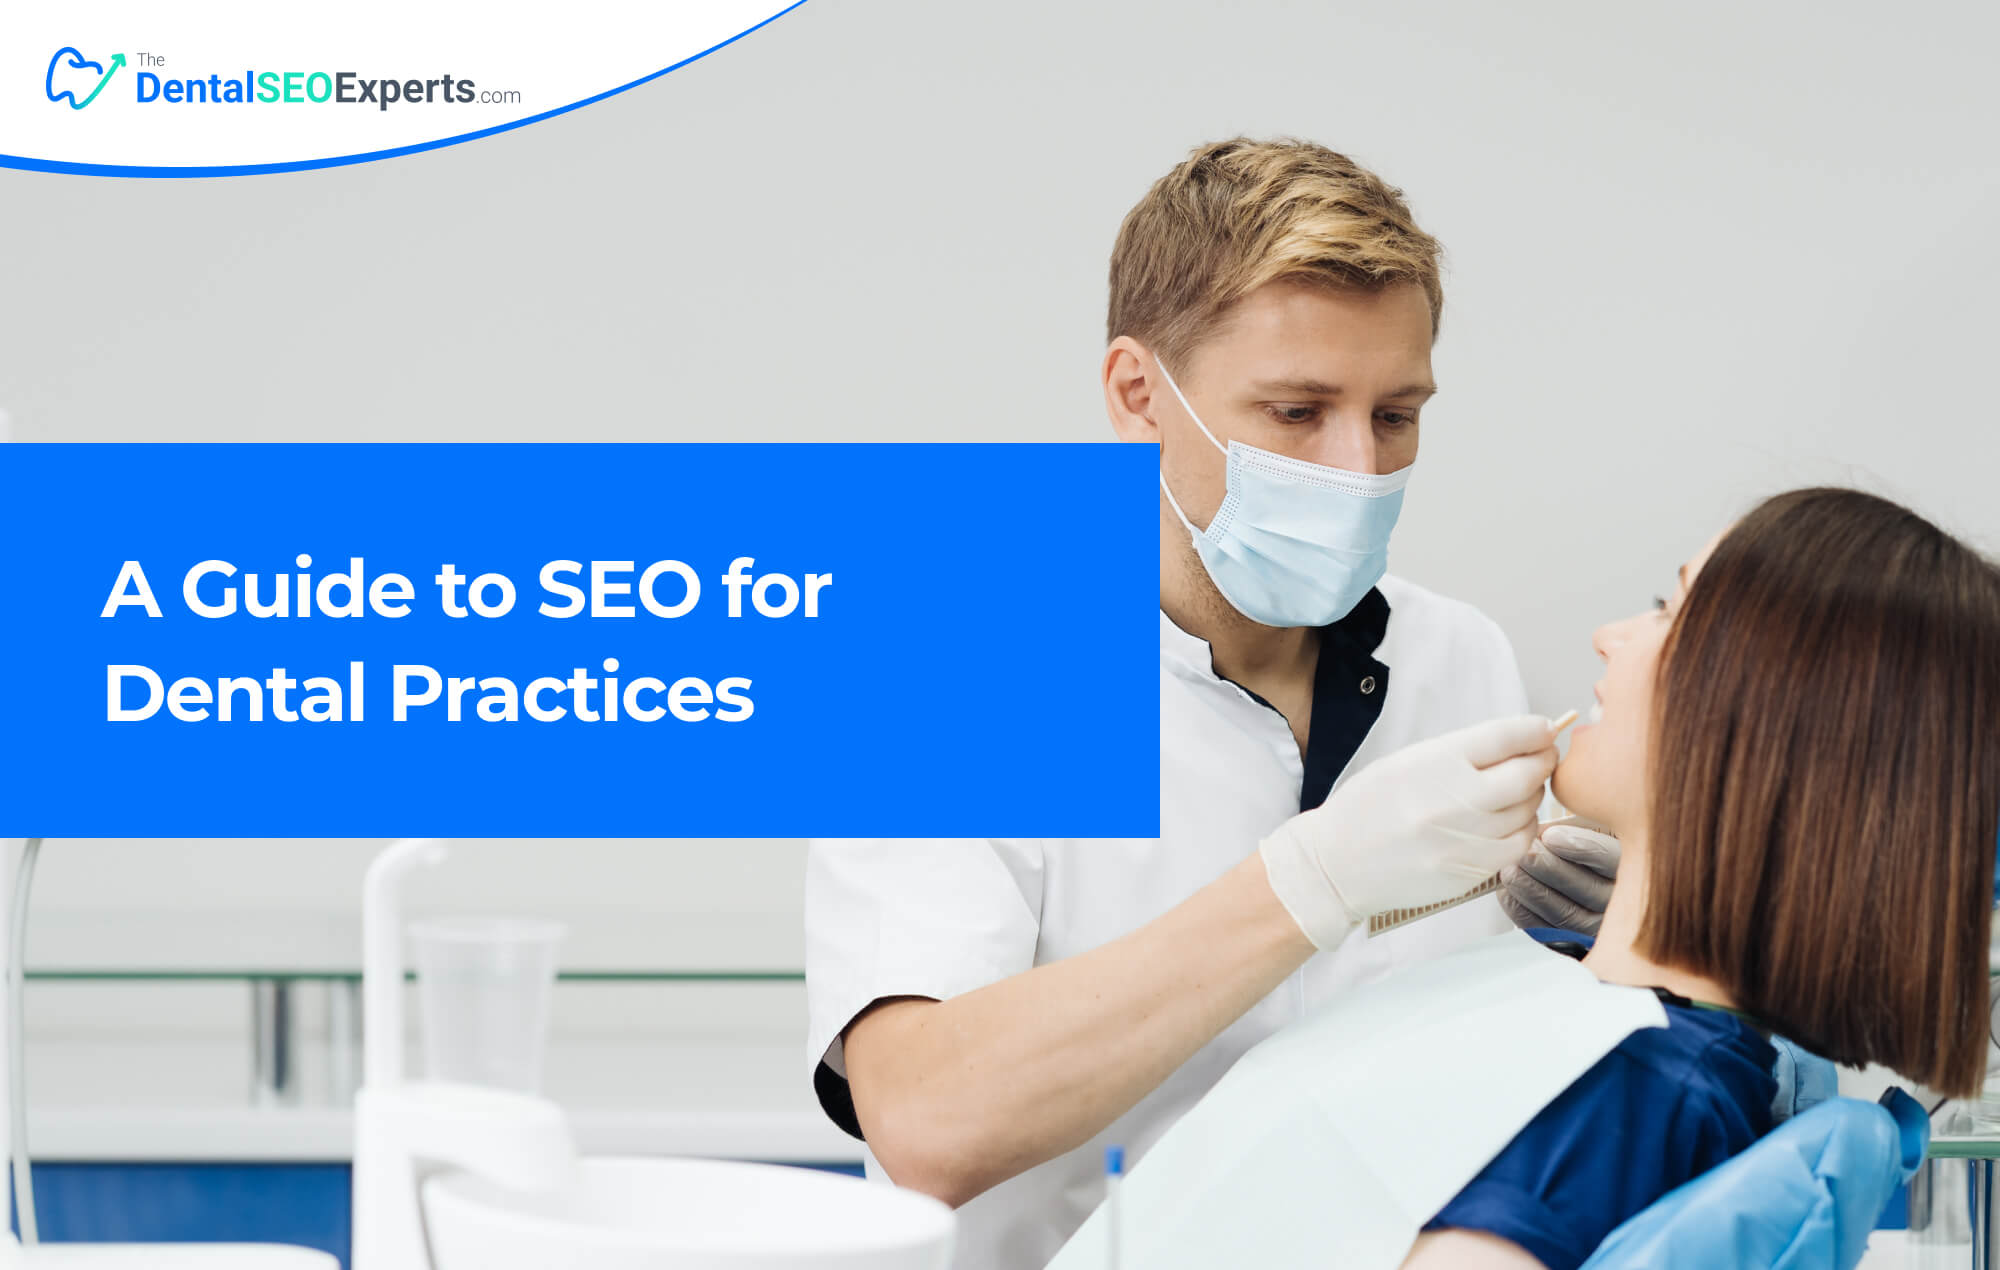 A Guide to SEO for Dental Practices